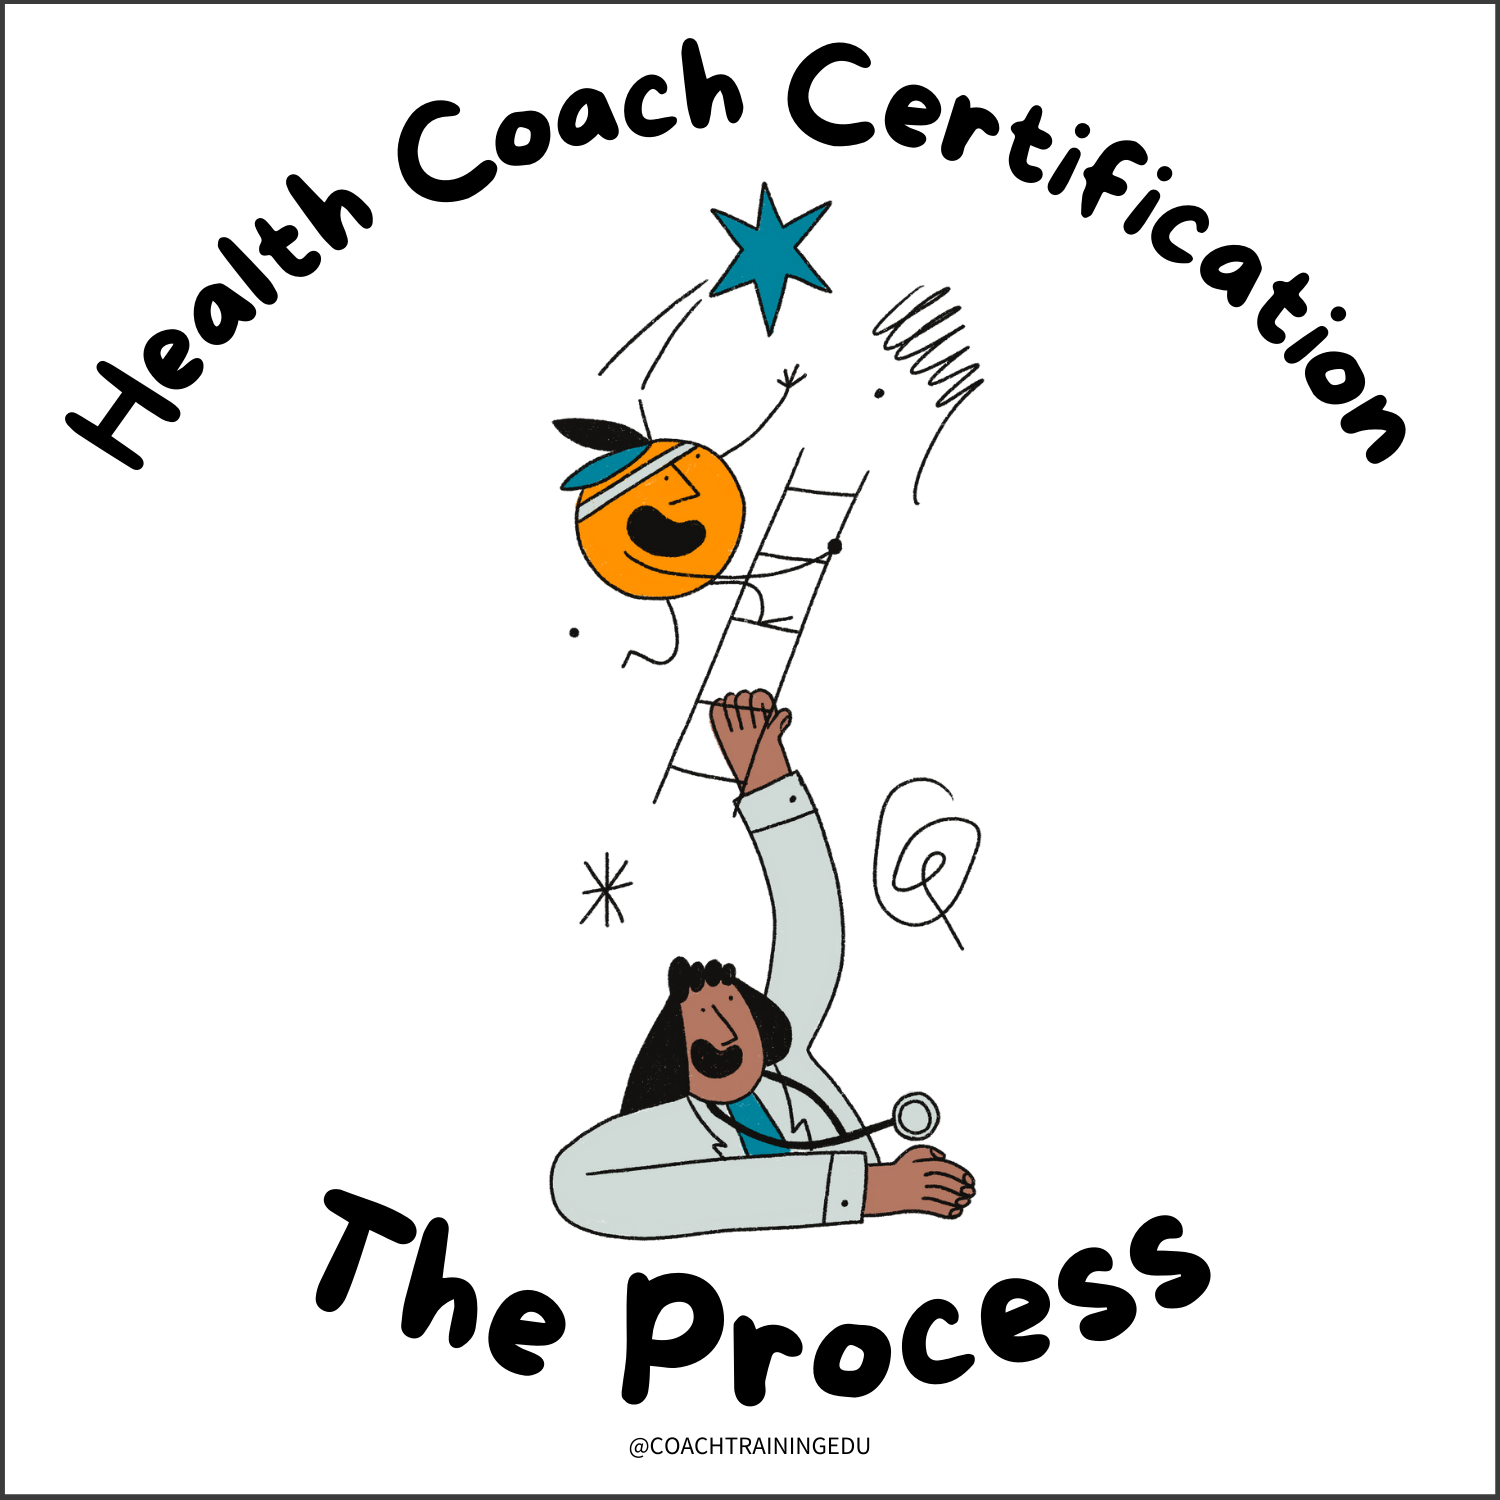 Health Coach Certification: The Process
Health and wellness coaching is one arm of life coaching that enables coaches to participate in the physical and mental health journeys of their clients.